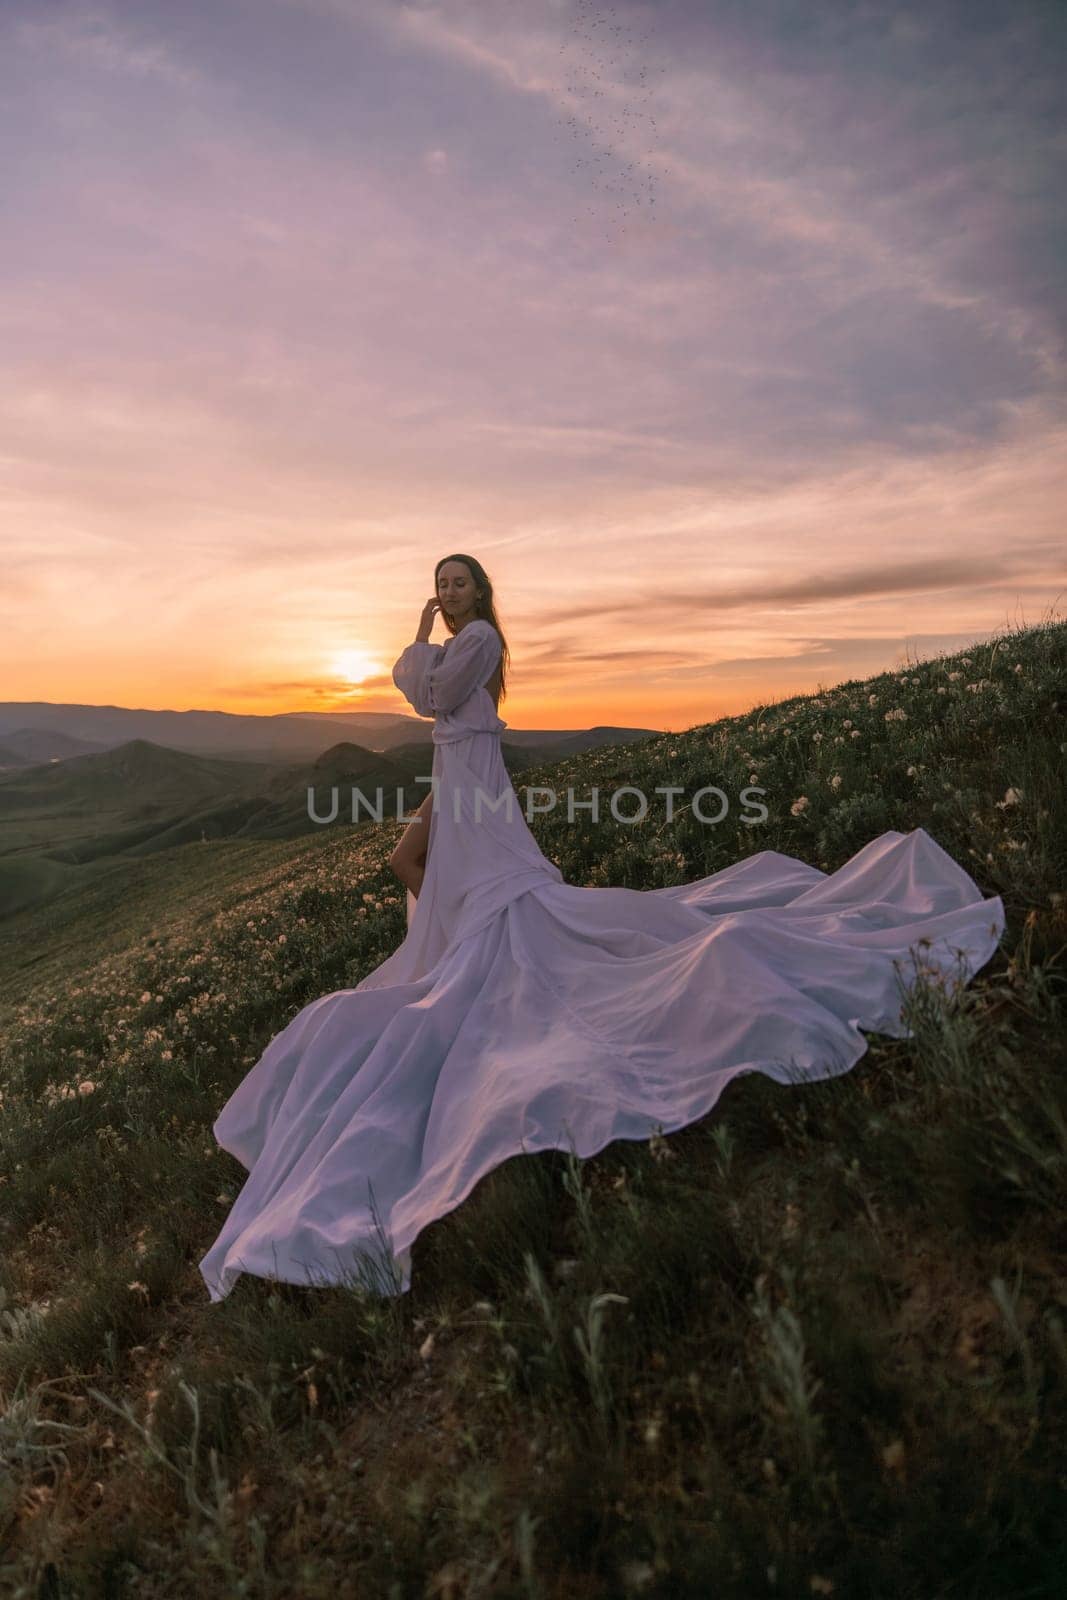 A woman in a long white dress is standing on a hillside, with the sun setting in the background. The scene is serene and peaceful, with the woman's dress flowing in the wind